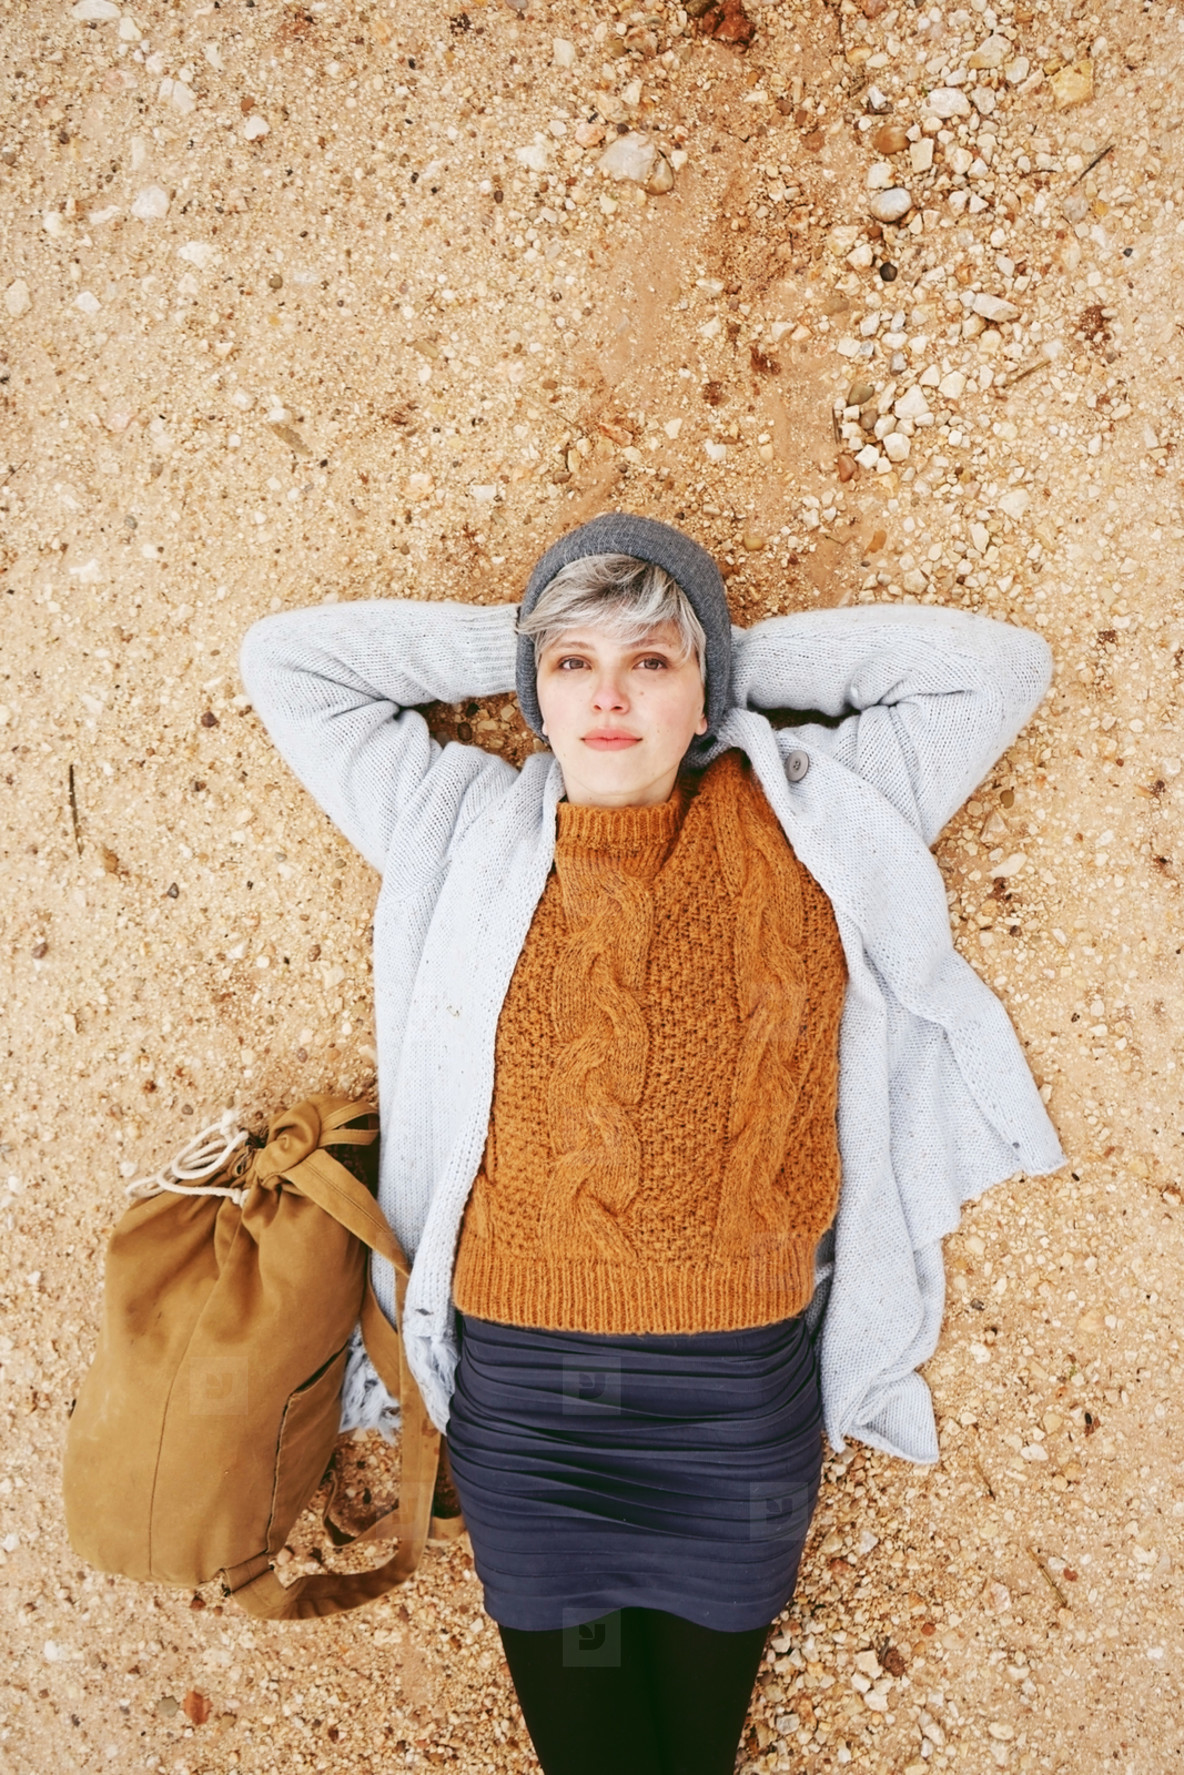 An adventurer young caucasian woman lying on grit ground beside